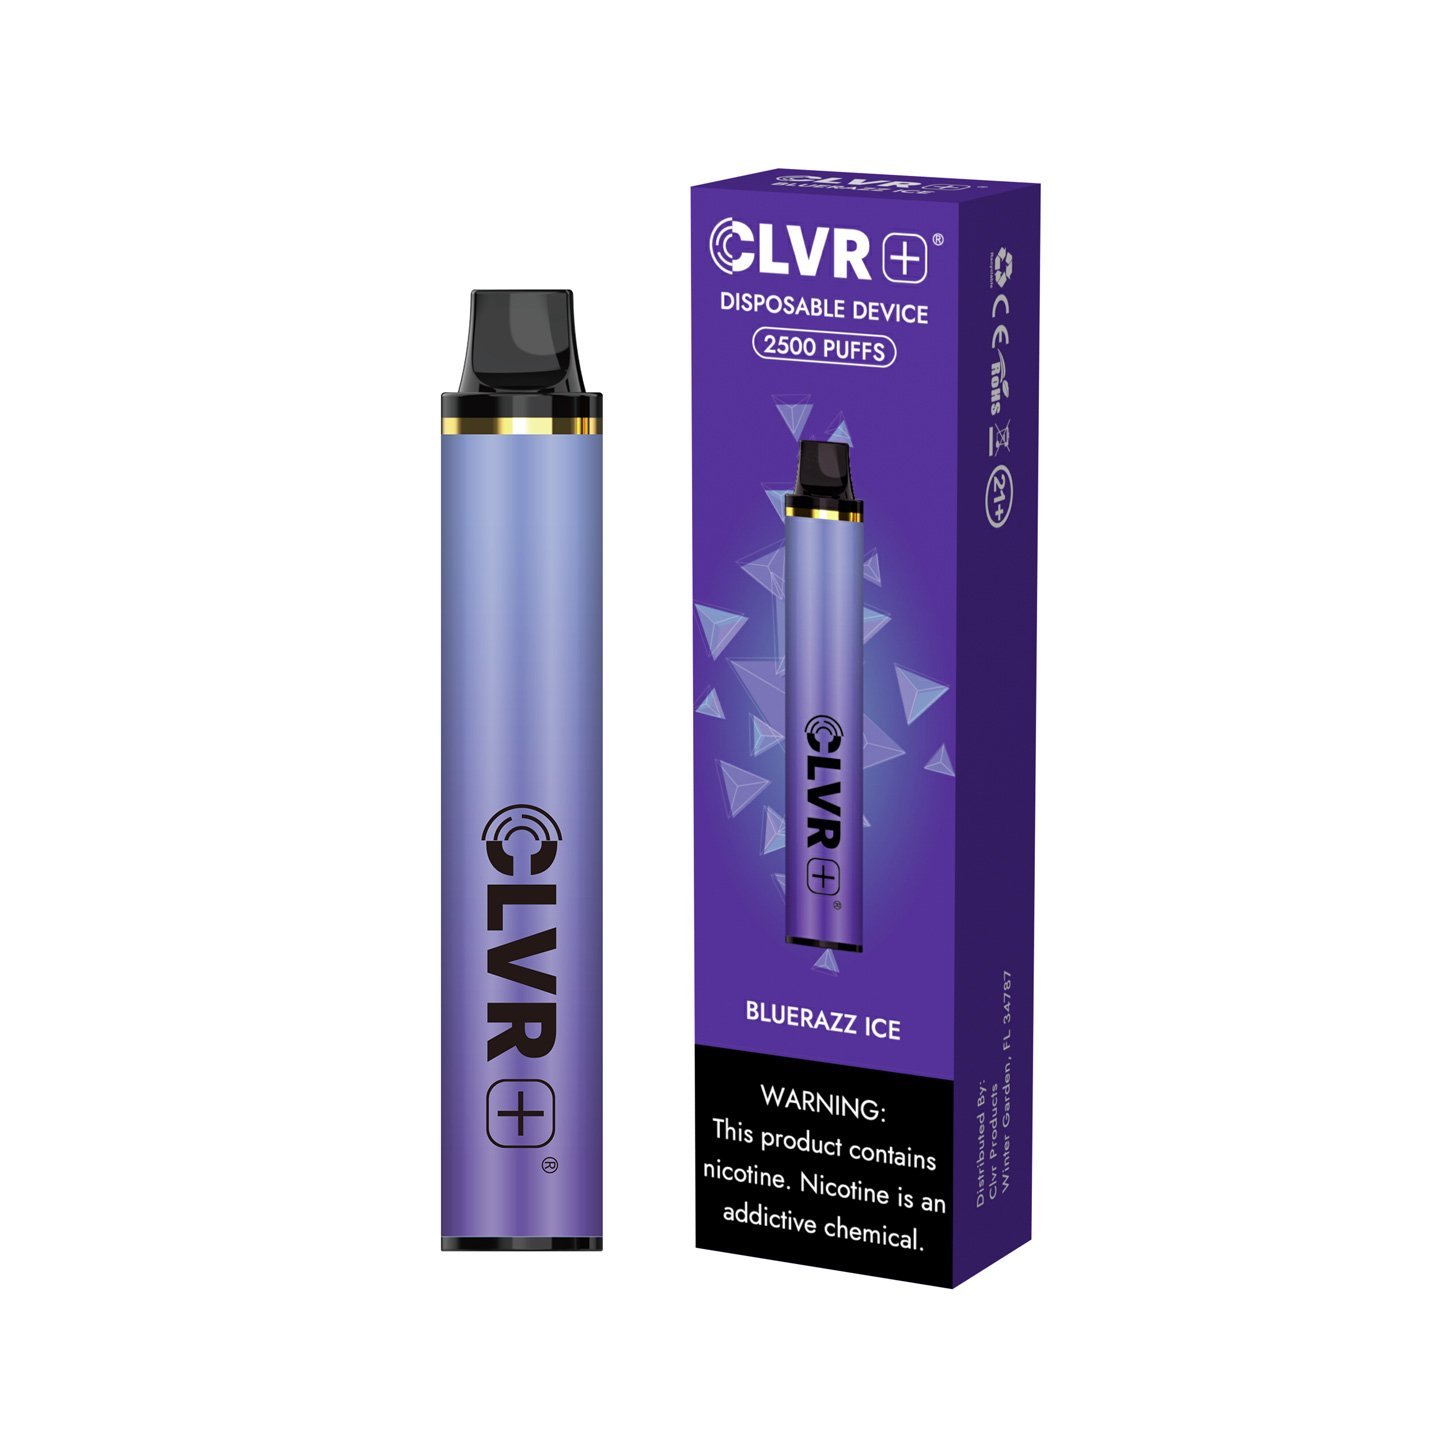 CLVRPlus Disposable Device (Bluerazz Ice- 2500 Puffs)